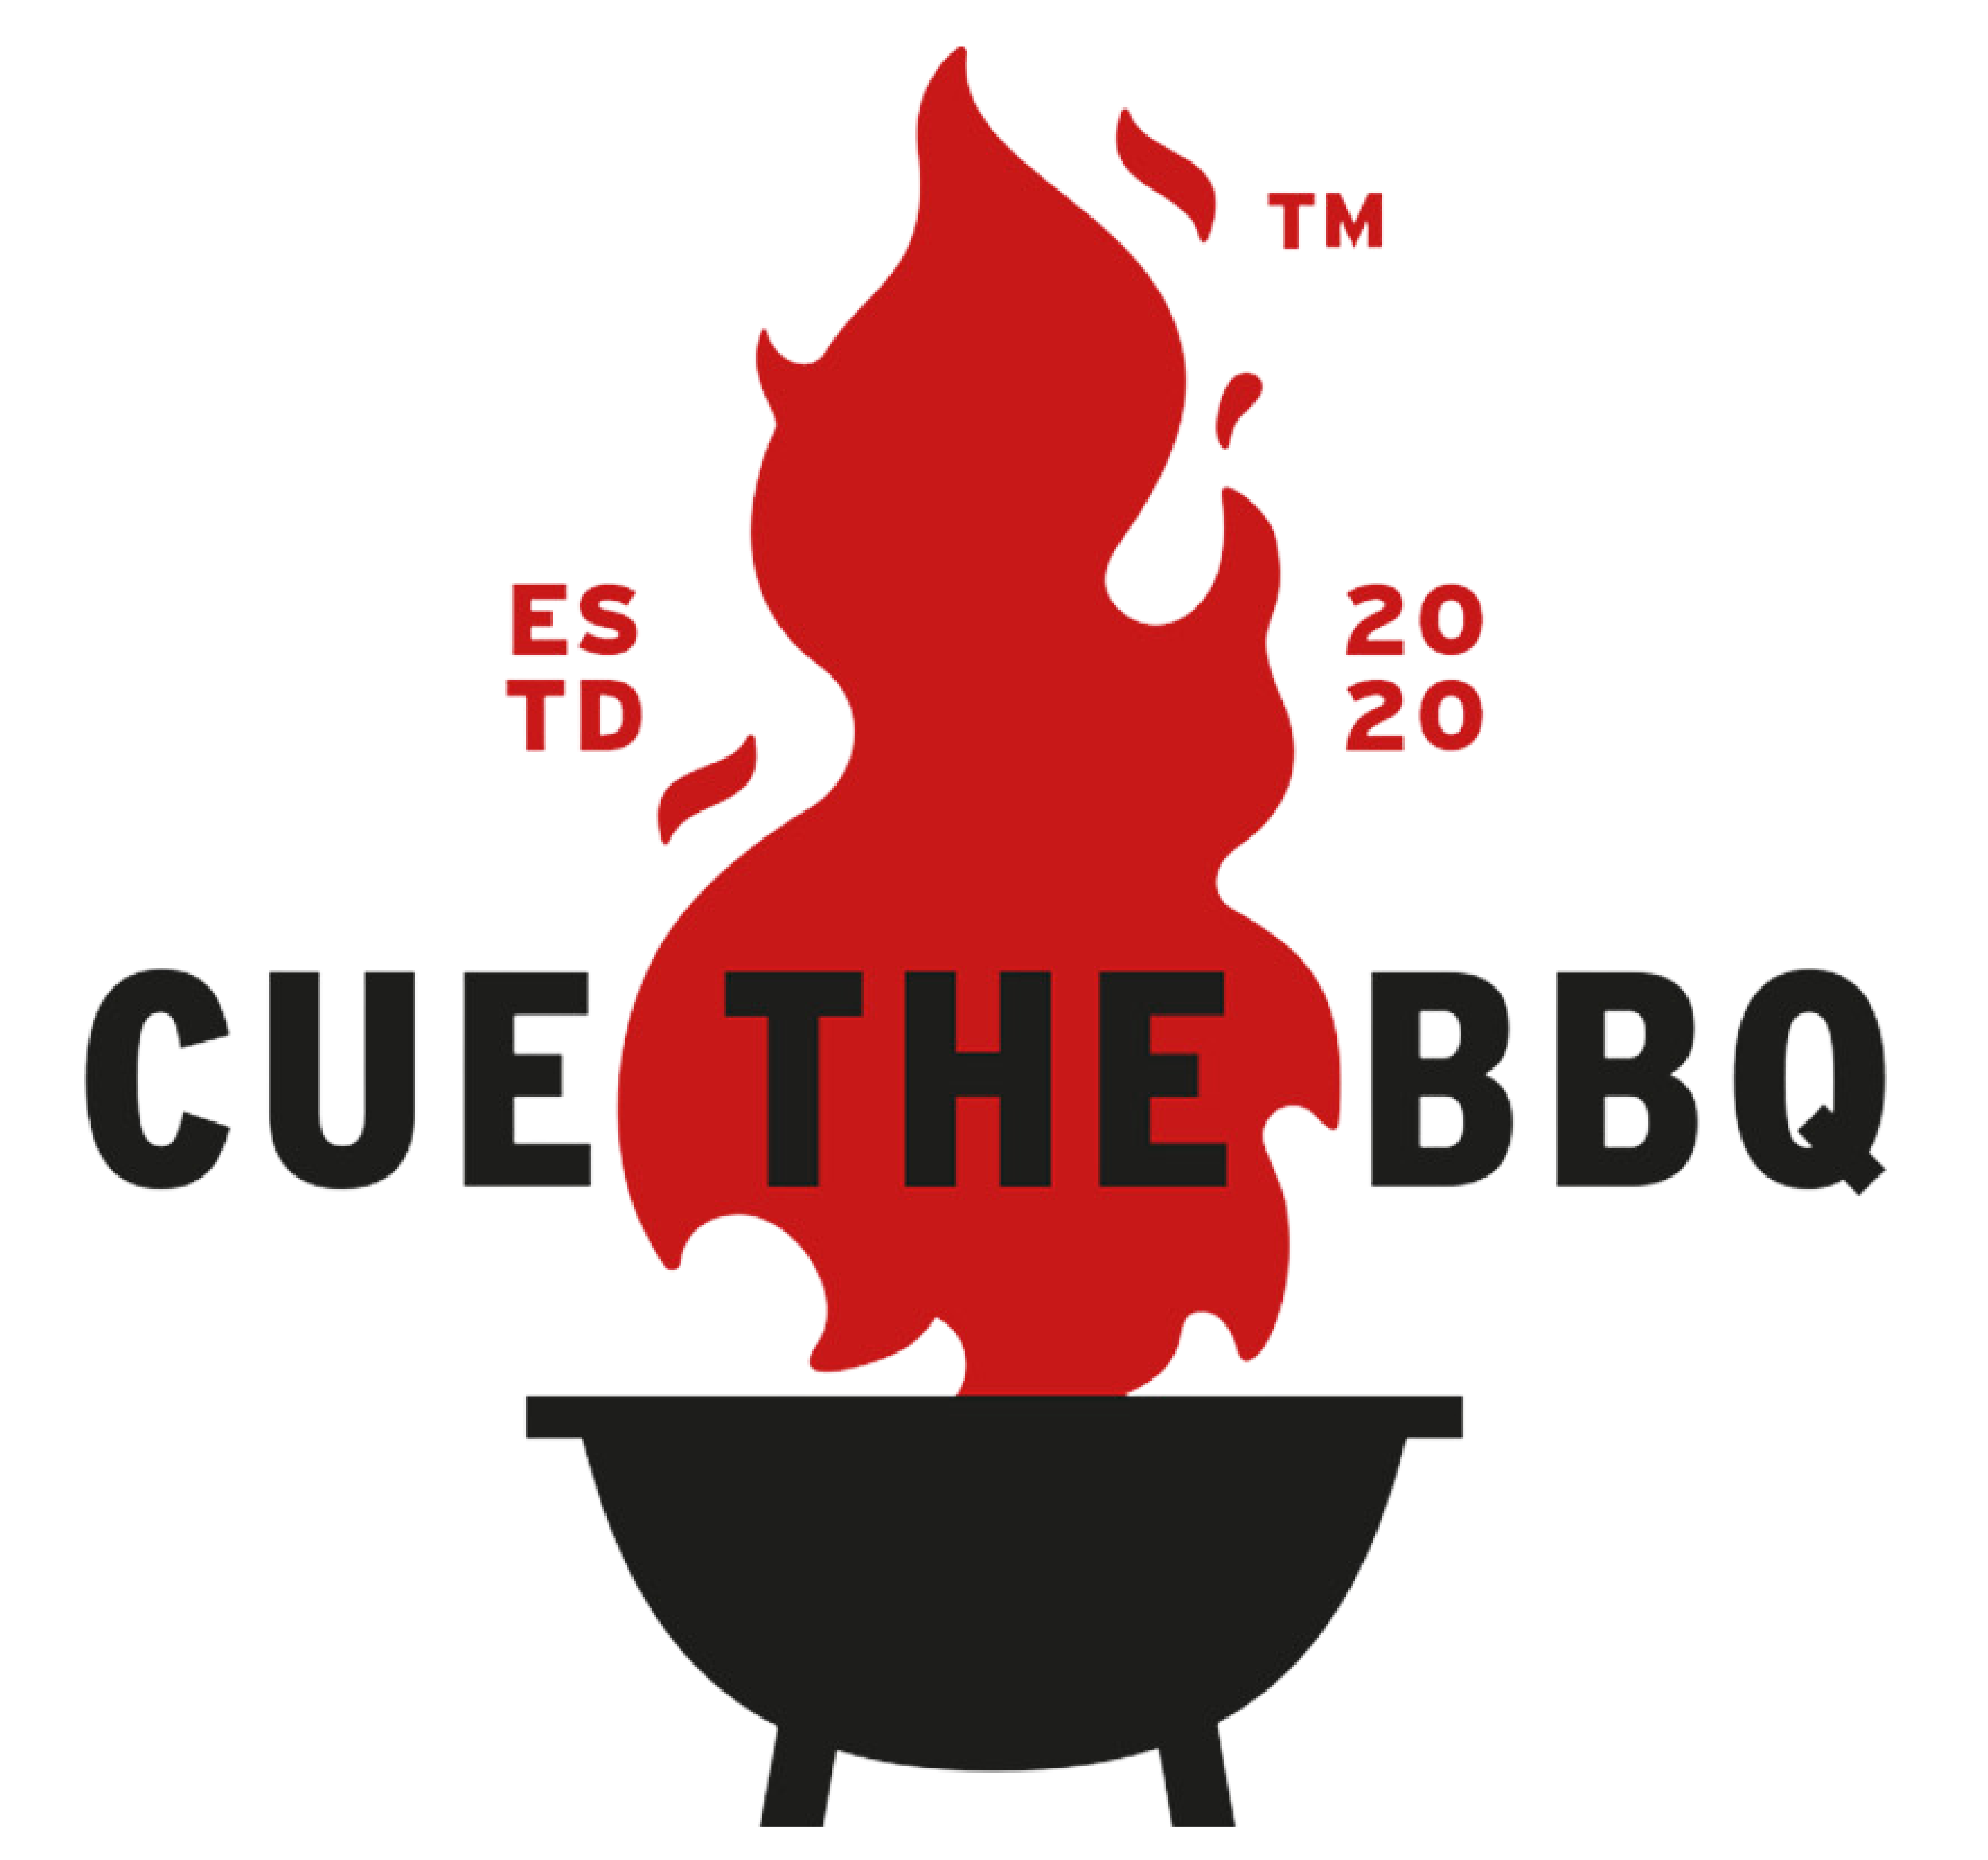 Cue-the-BBQ